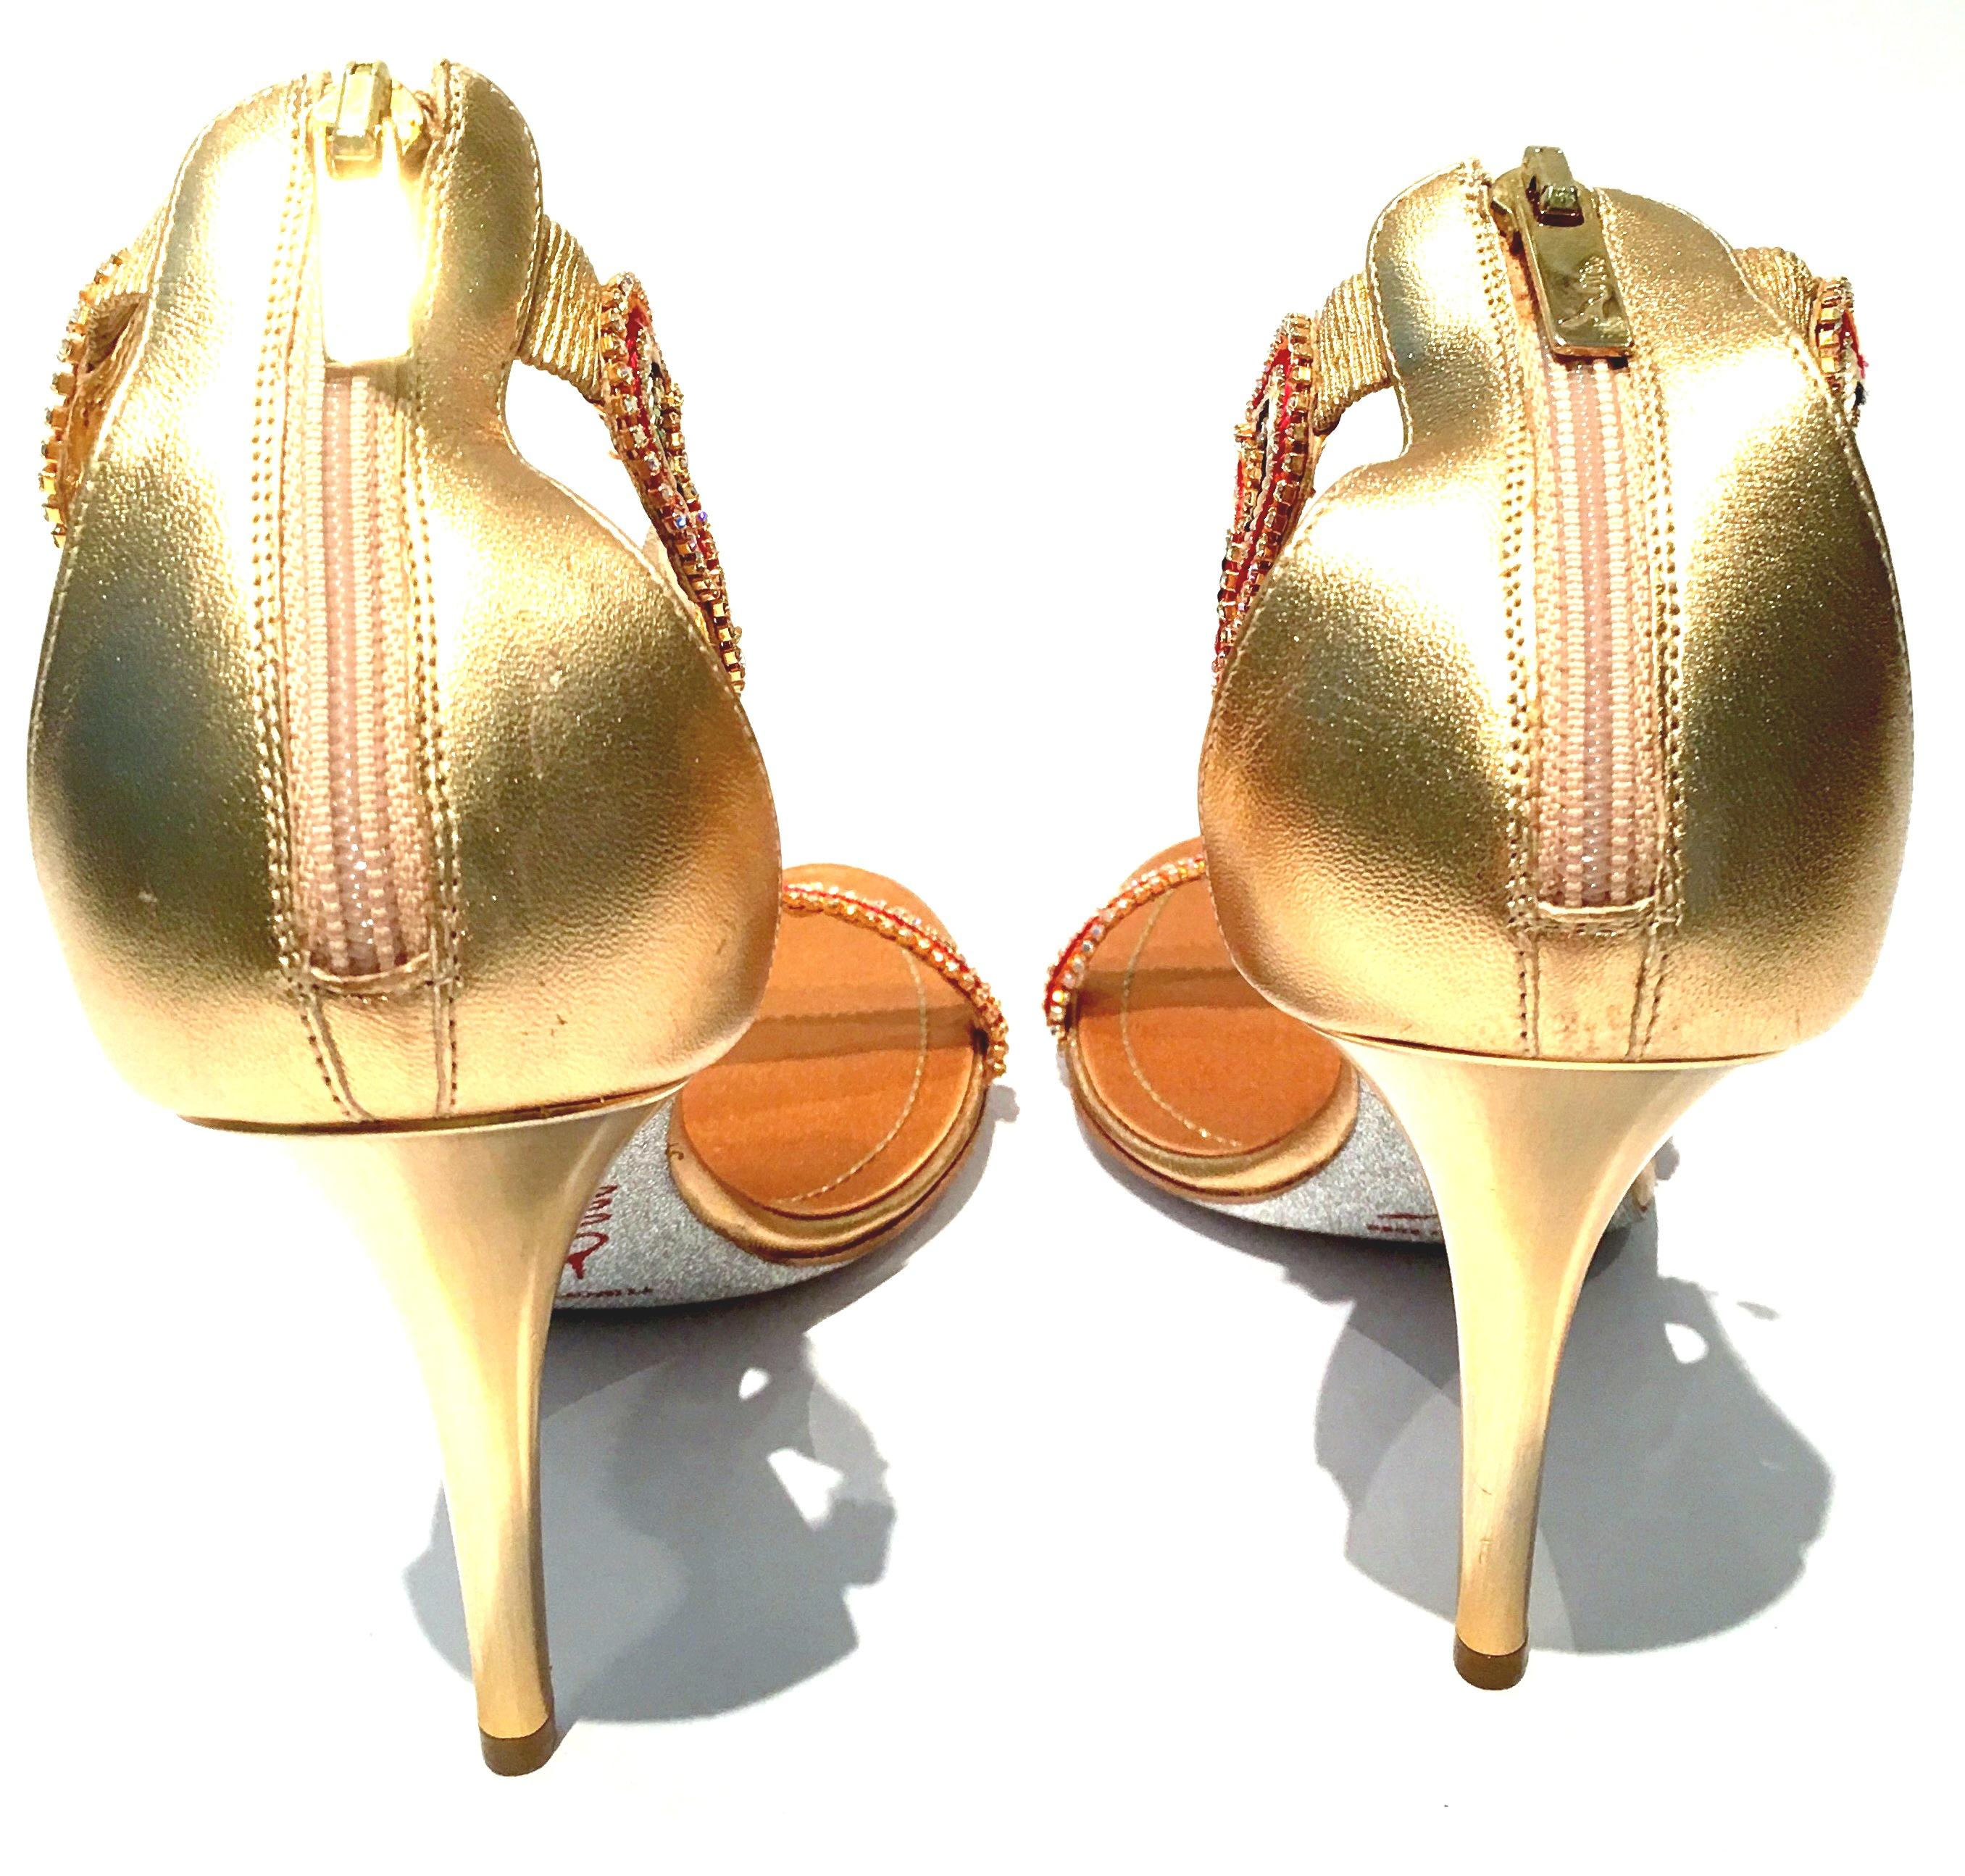 21st Century New Rene Caovilla Metallic Embellished Ankle Wrap Sandals  In Excellent Condition For Sale In West Palm Beach, FL